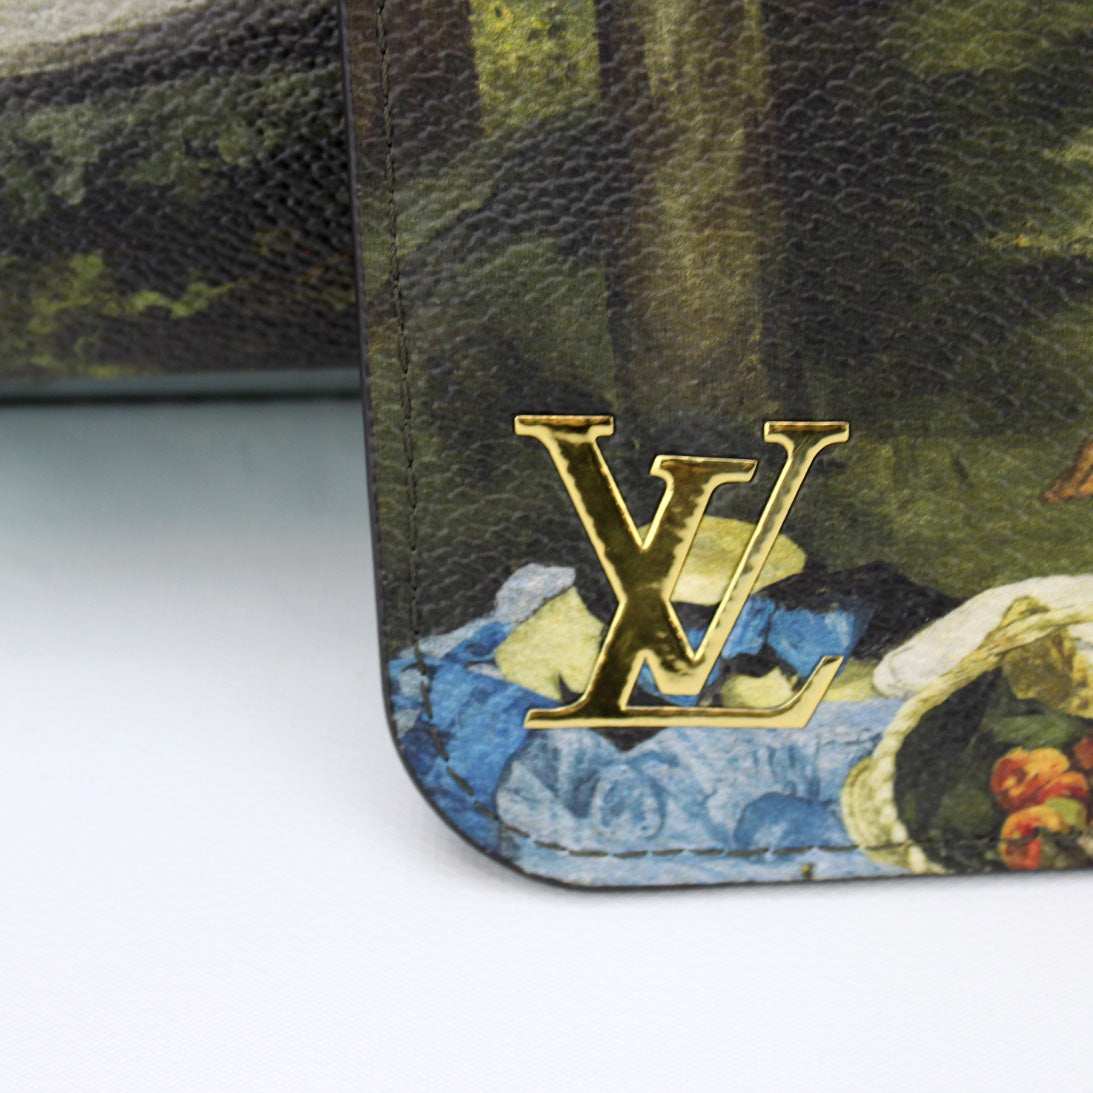 LOUIS VUITTON LIMITED EDITION MASTERS MONET NEVERFULL MM